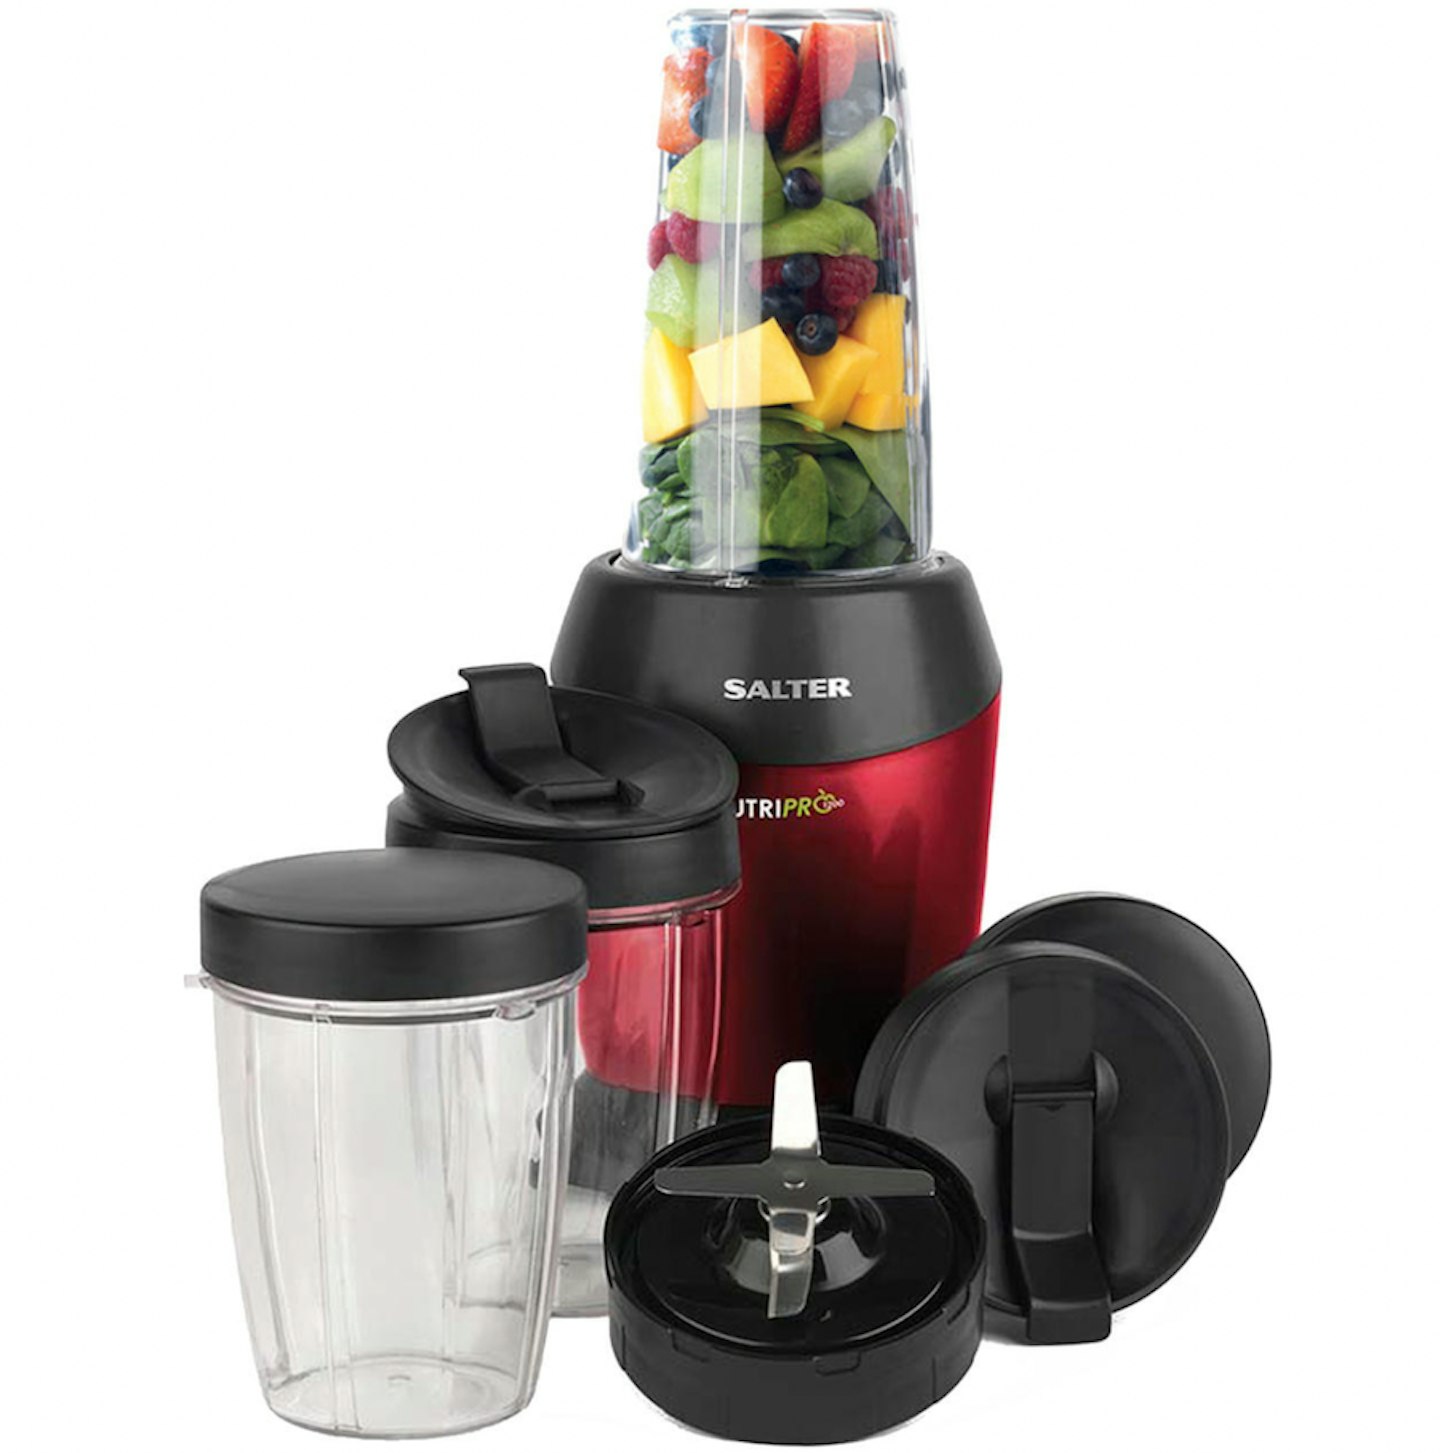 NutriPro Super Charged Multi-Purpose Nutrient Extractor Blender